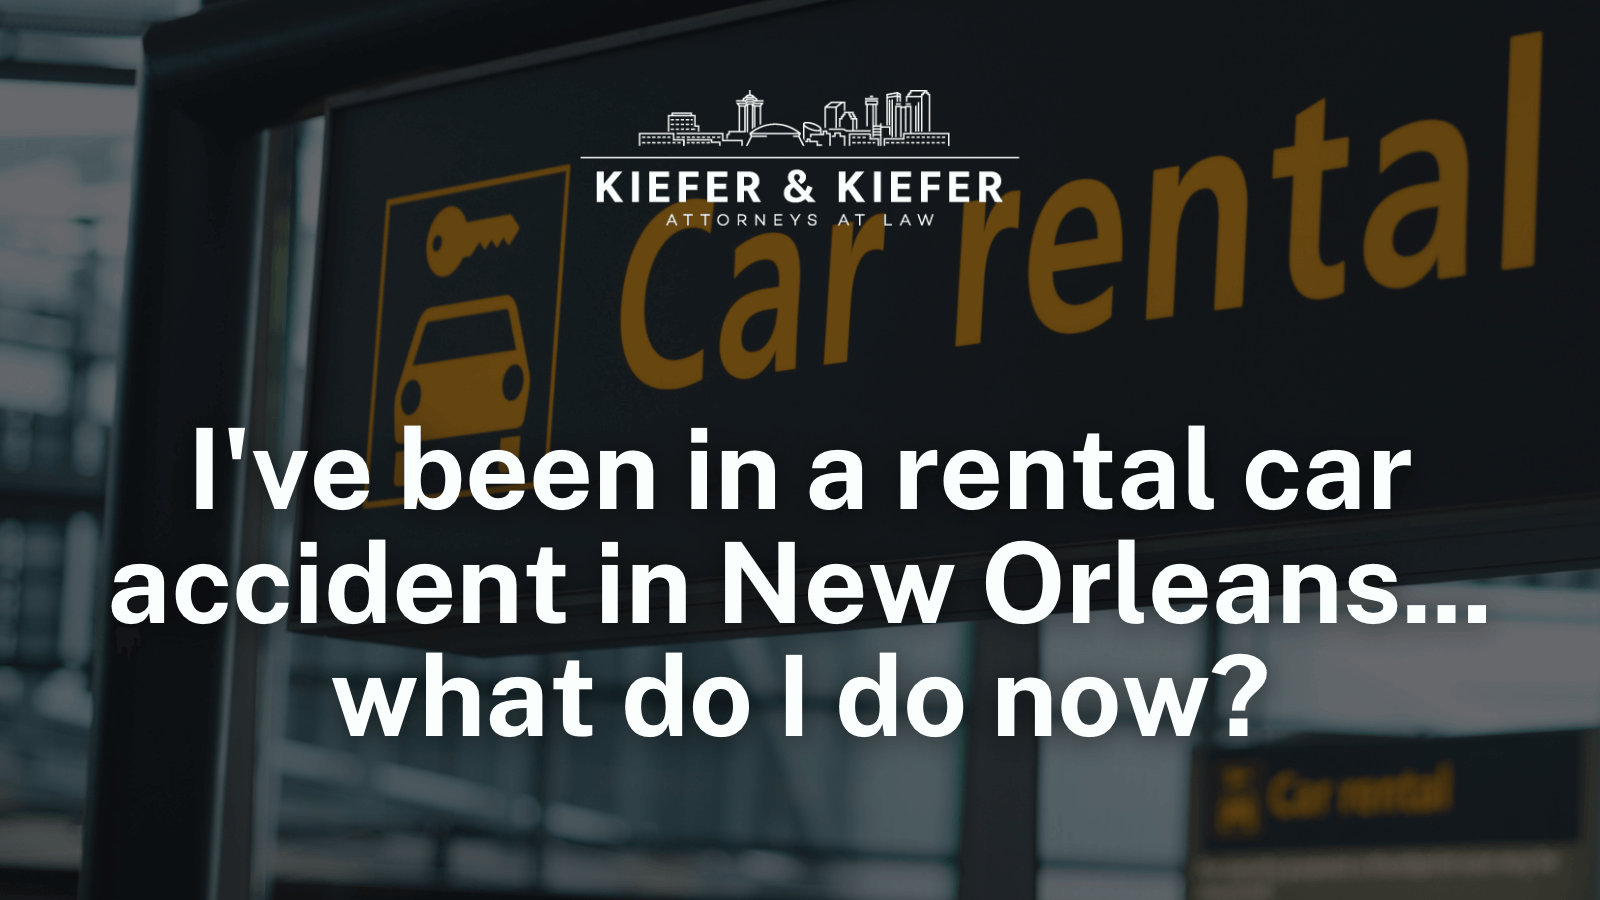 I've been in a rental car accident in New Orleans - Kiefer & Kiefer New Orleans Personal Injury Attorneys